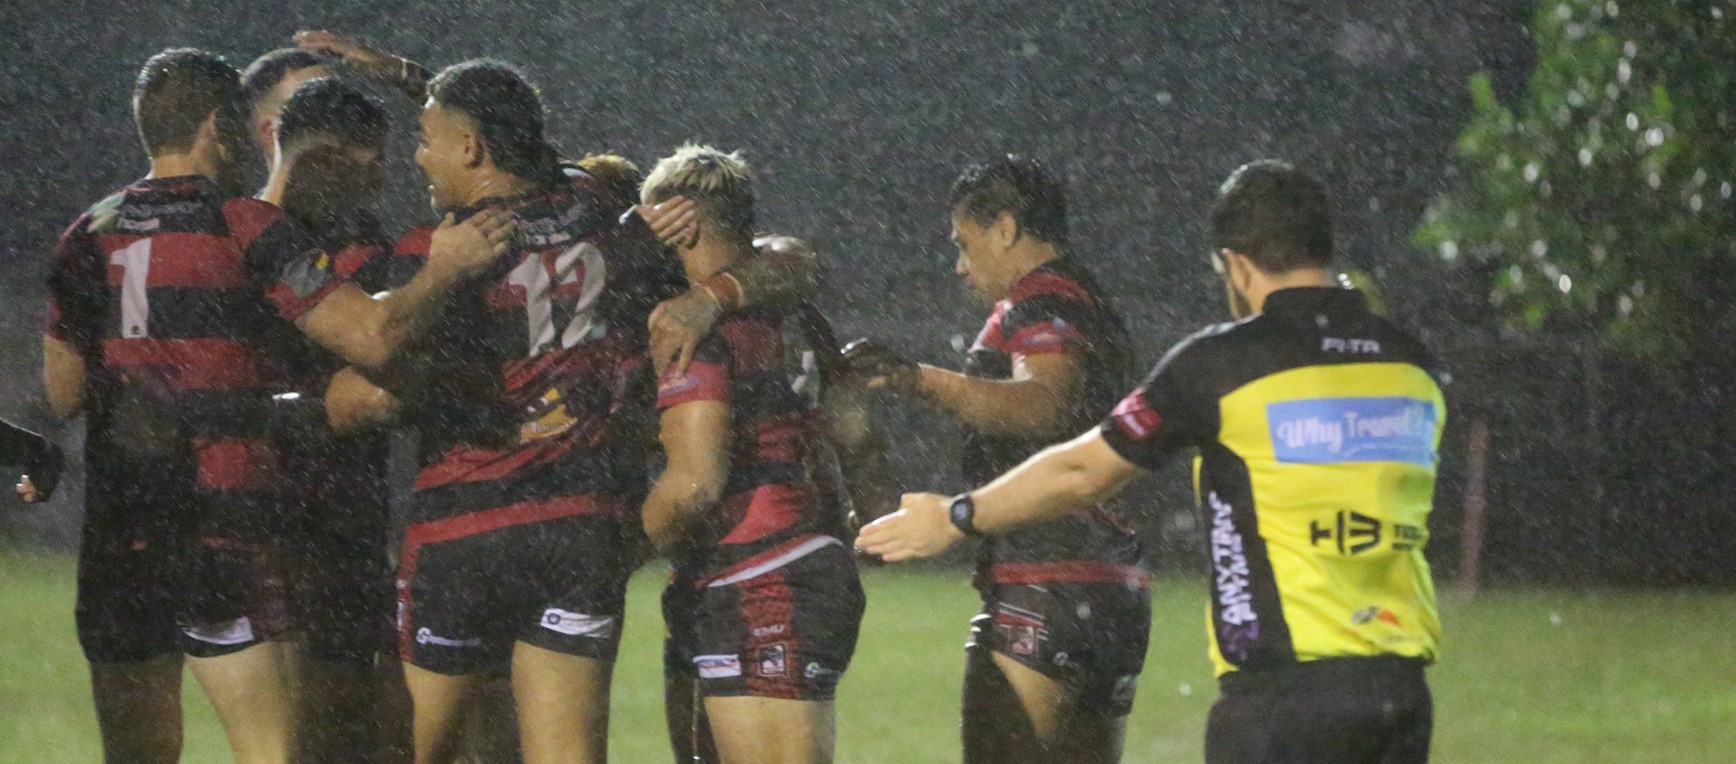 In pictures: Panthers defy downpour to cage Roosters